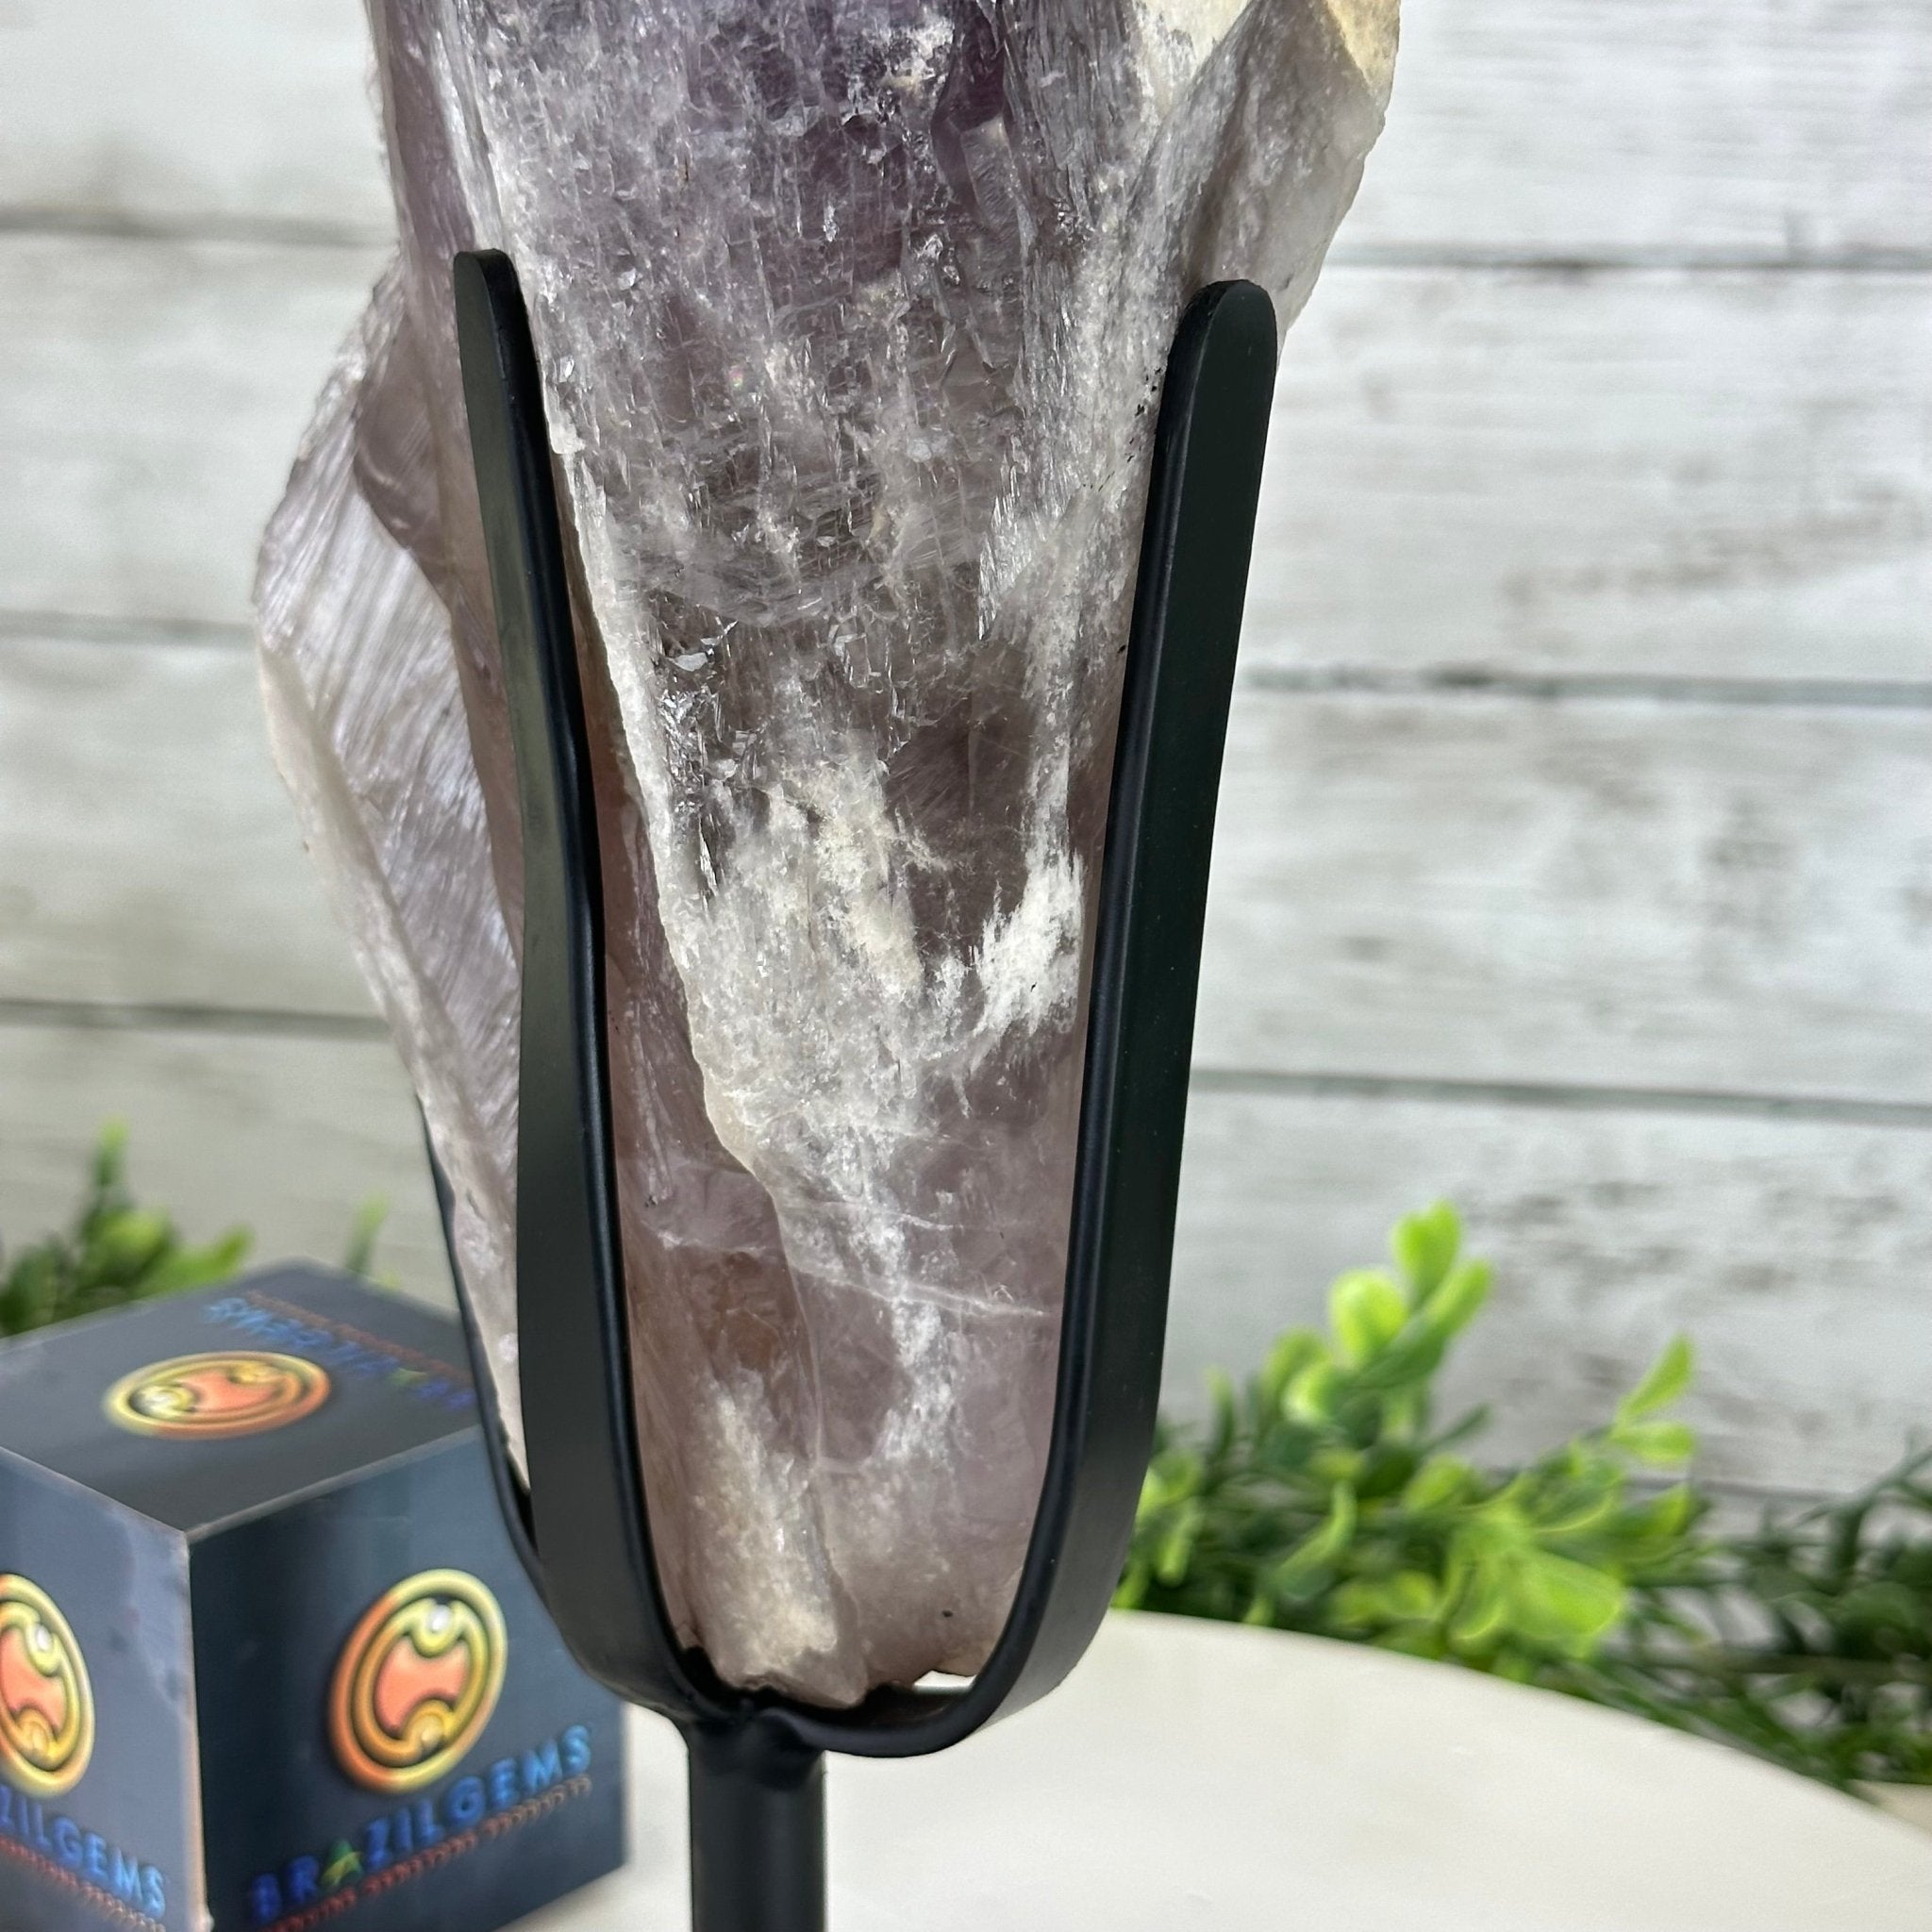 Large Chevron Amethyst Point on a Metal Stand, 8.8 lbs & 16.1" Tall #3121AM-001 - Brazil GemsBrazil GemsLarge Chevron Amethyst Point on a Metal Stand, 8.8 lbs & 16.1" Tall #3121AM-001Crystal Points3121AM-001